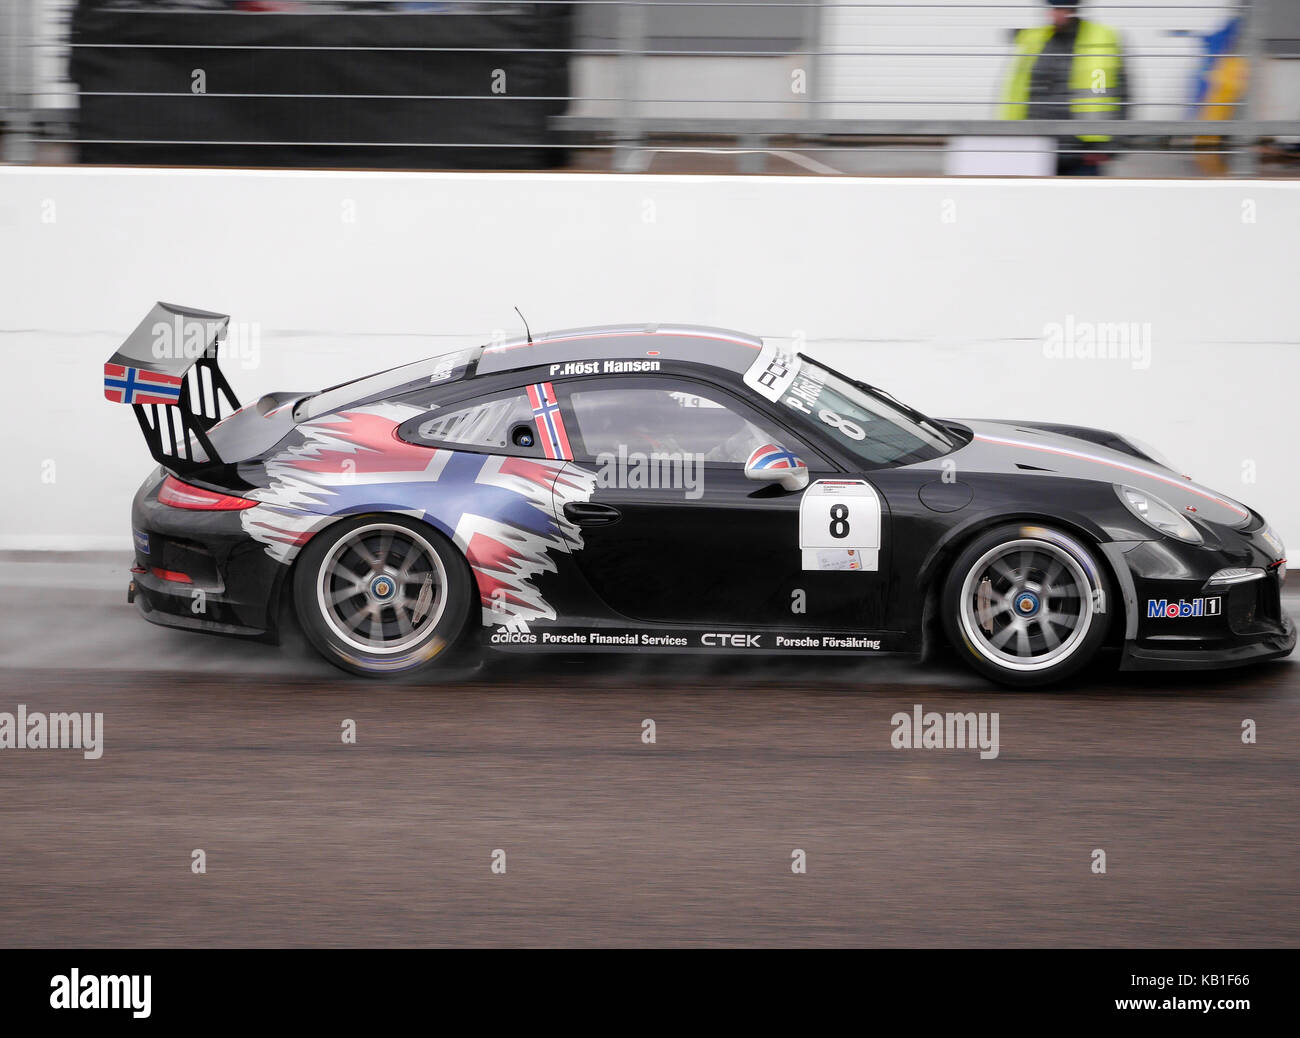 Porsche Carrera cup race car at Anderstorp race track in Småland, Sweden,  Europe Stock Photo - Alamy